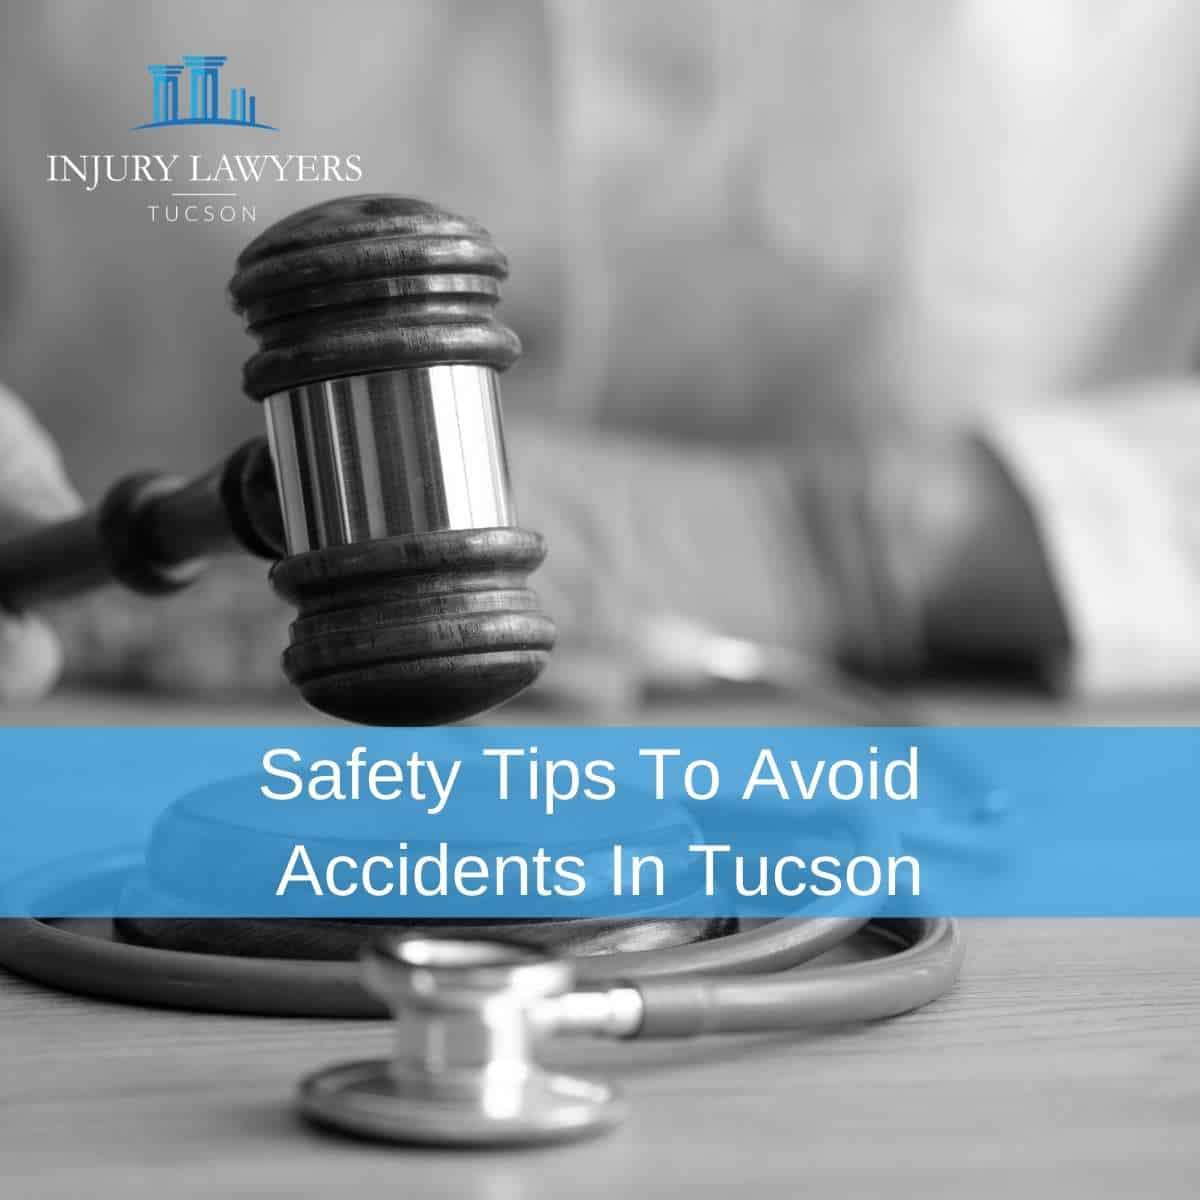 Safety Tips To Avoid Accidents in Tucson